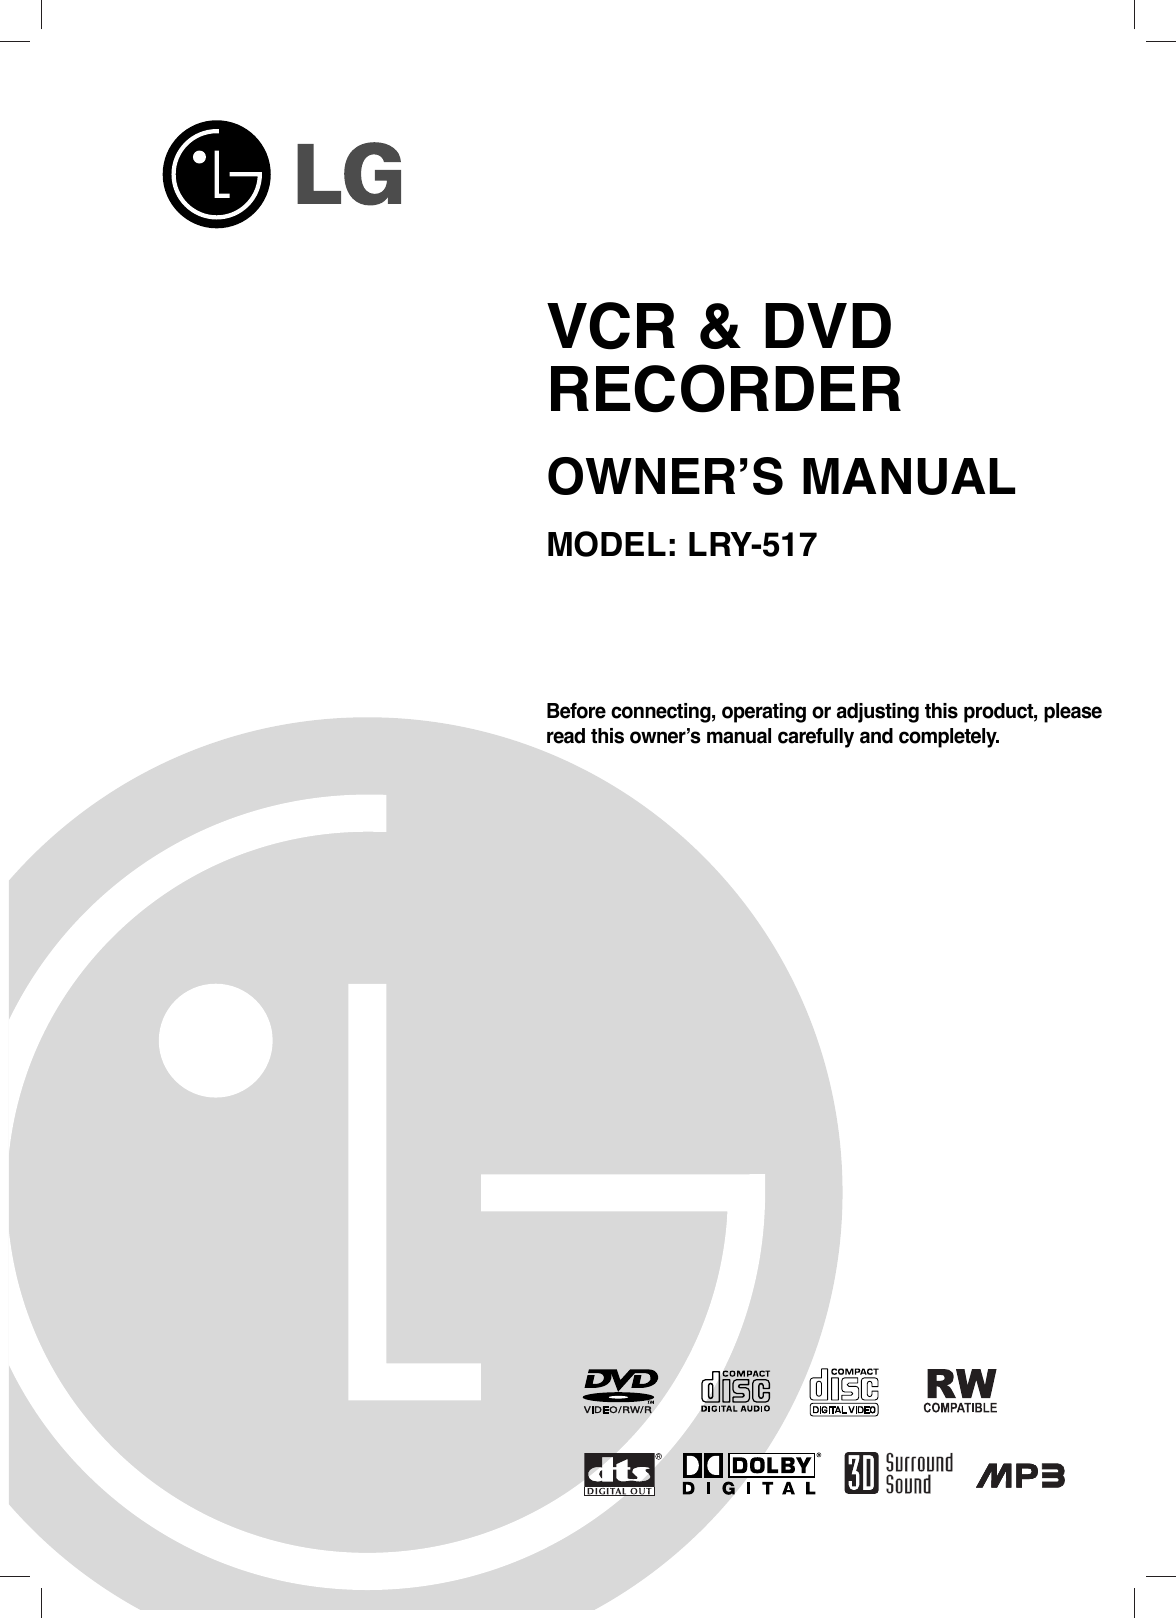 Before connecting, operating or adjusting this product, pleaseread this owner’s manual carefully and completely.VCR &amp; DVDRECORDEROWNER’S MANUALMODEL: LRY-517